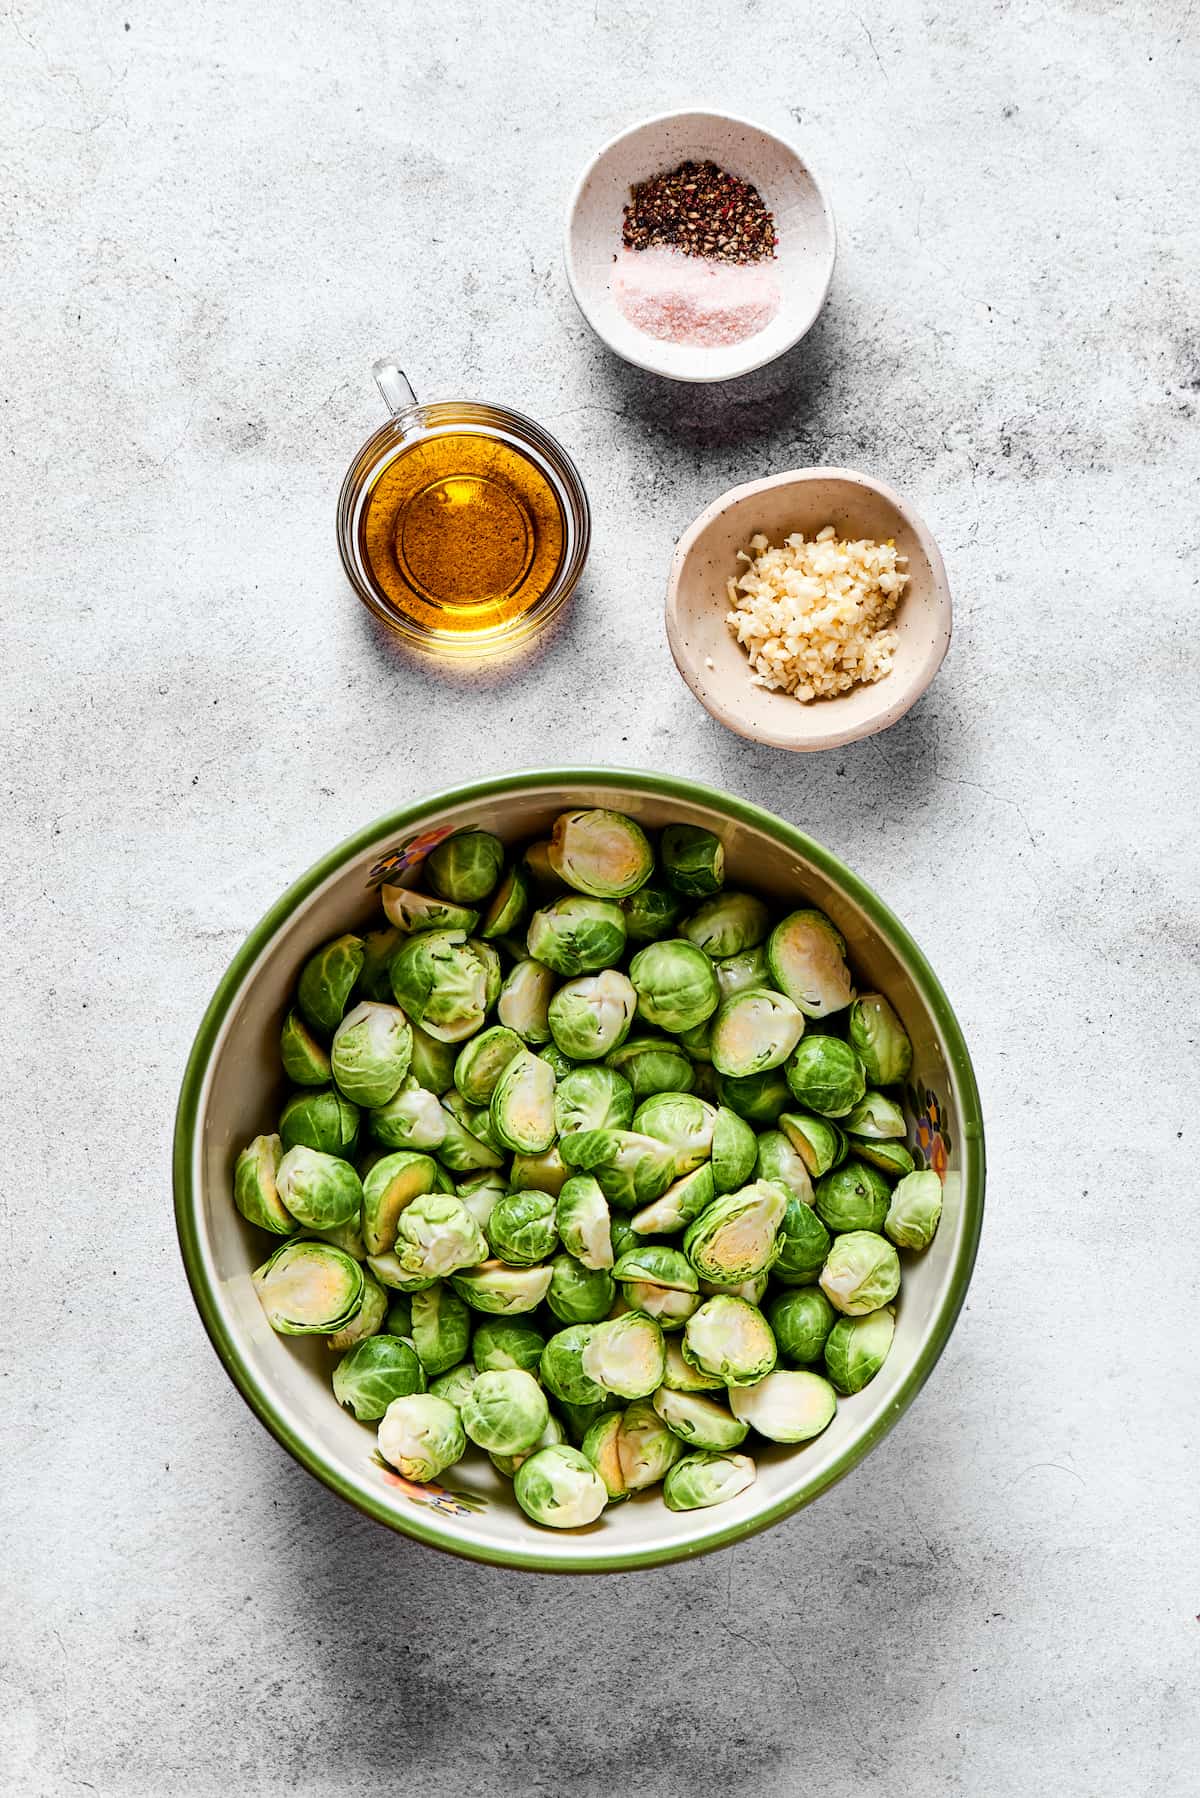 From top: Salt and pepper, olive oil, garlic, brussels sprouts.